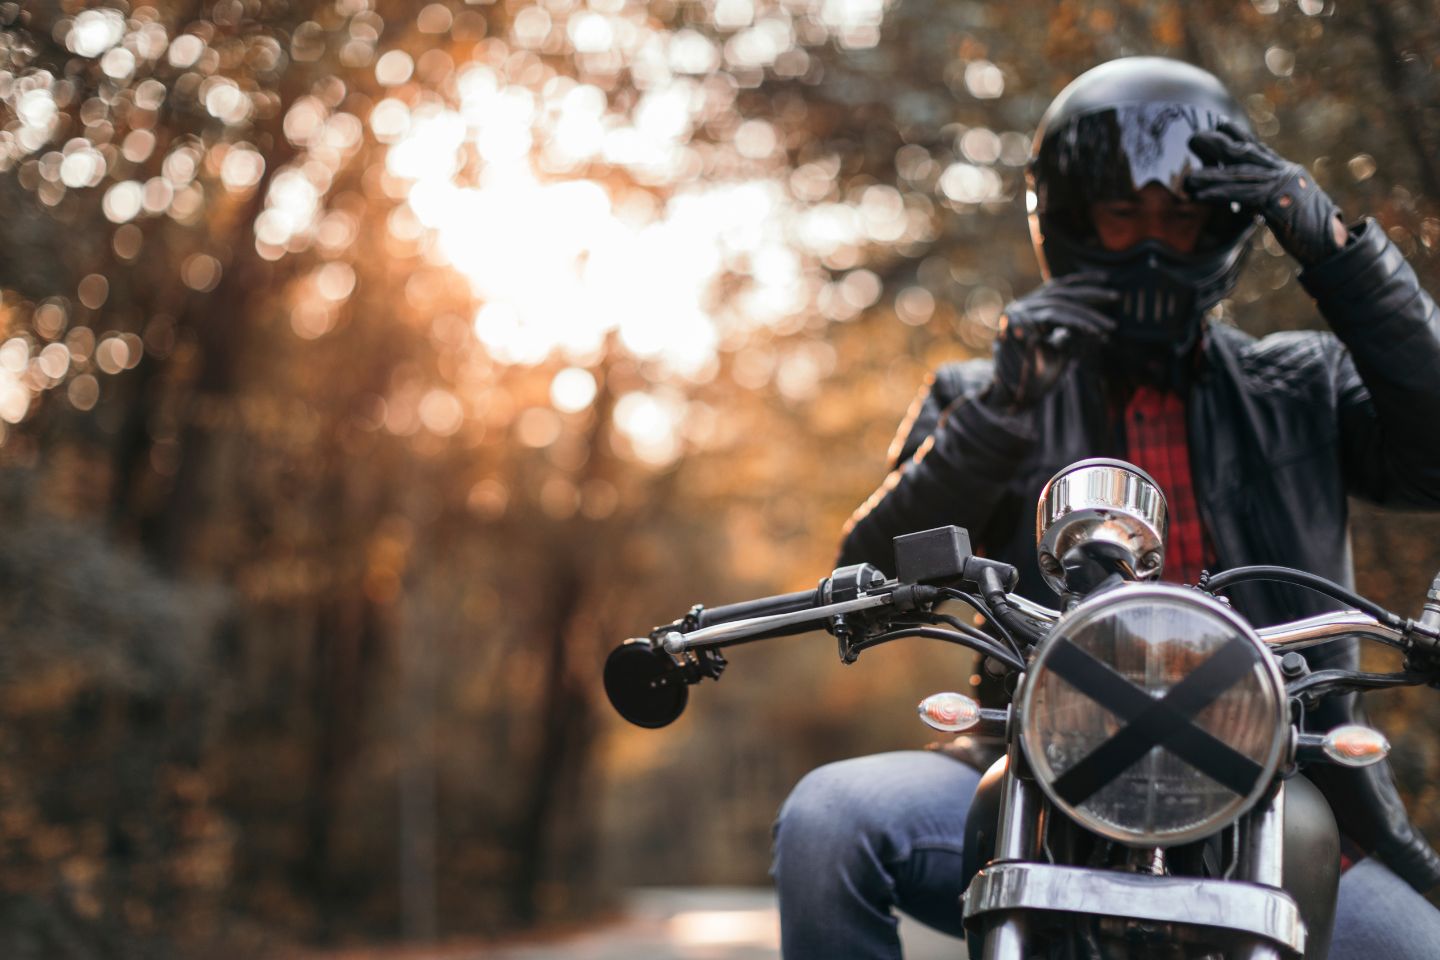 What to Do Immediately After a Motorcycle Accident?